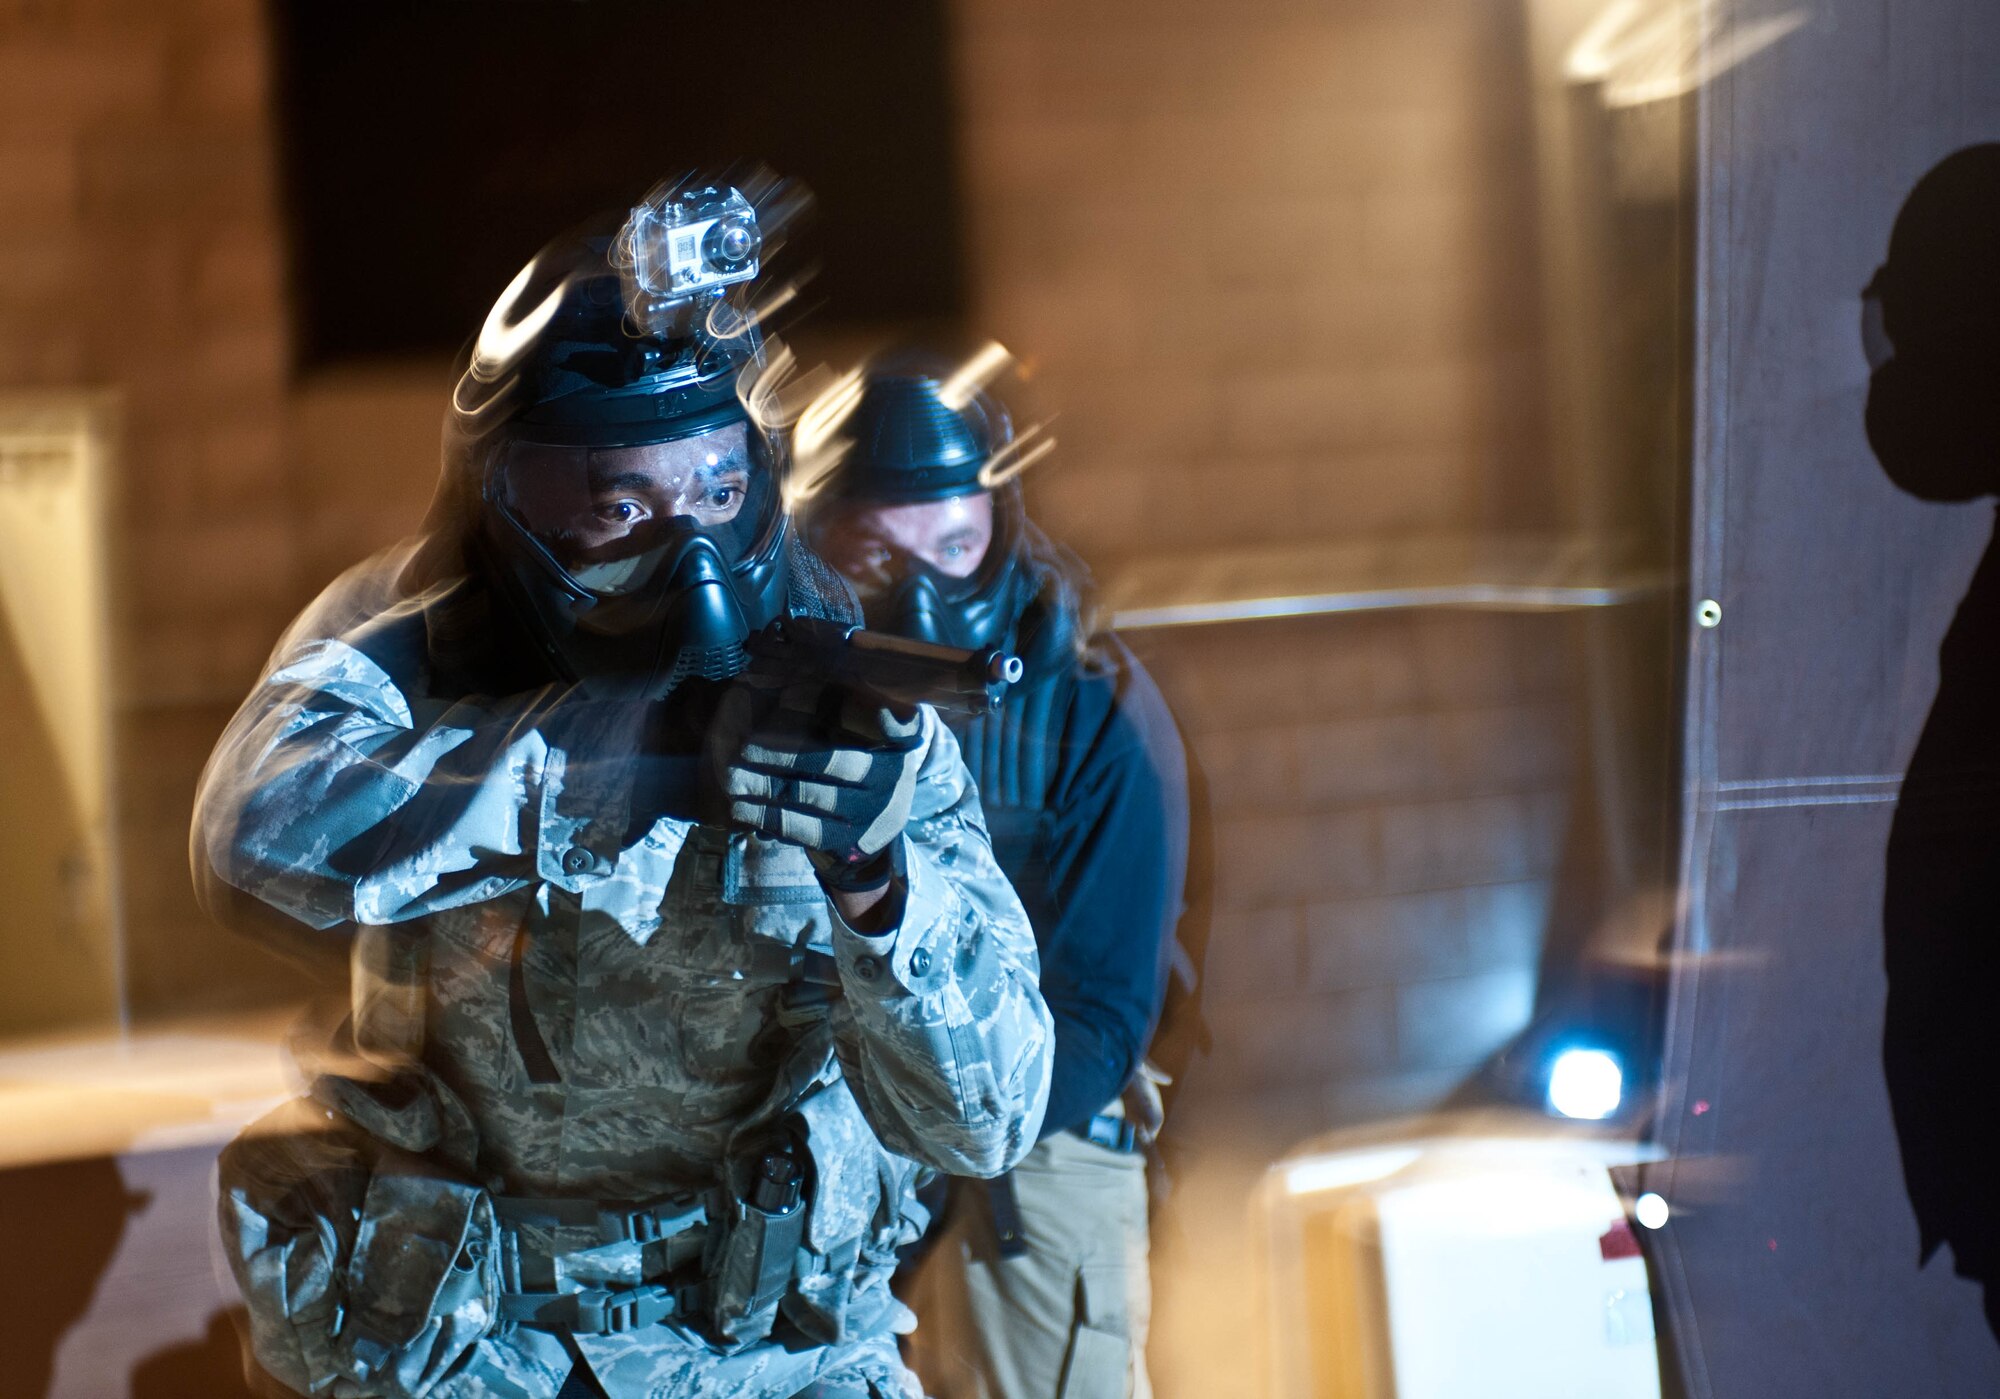 Airman Keith Leflore, and John Bisbee, 28th Security Forces squadron defenders, clear a simulated hostile environment during an active shooter exercise at Ellsworth Air Force Base, S.D., Aug. 24, 2012. Active Shooter situations normally last no more than 15 minutes, but can result in major loss of life. Defenders must be able to quickly respond in order to prevent further loss of life. (U.S. Air Force photo by Airman 1st Class Zachary Hada/Released)